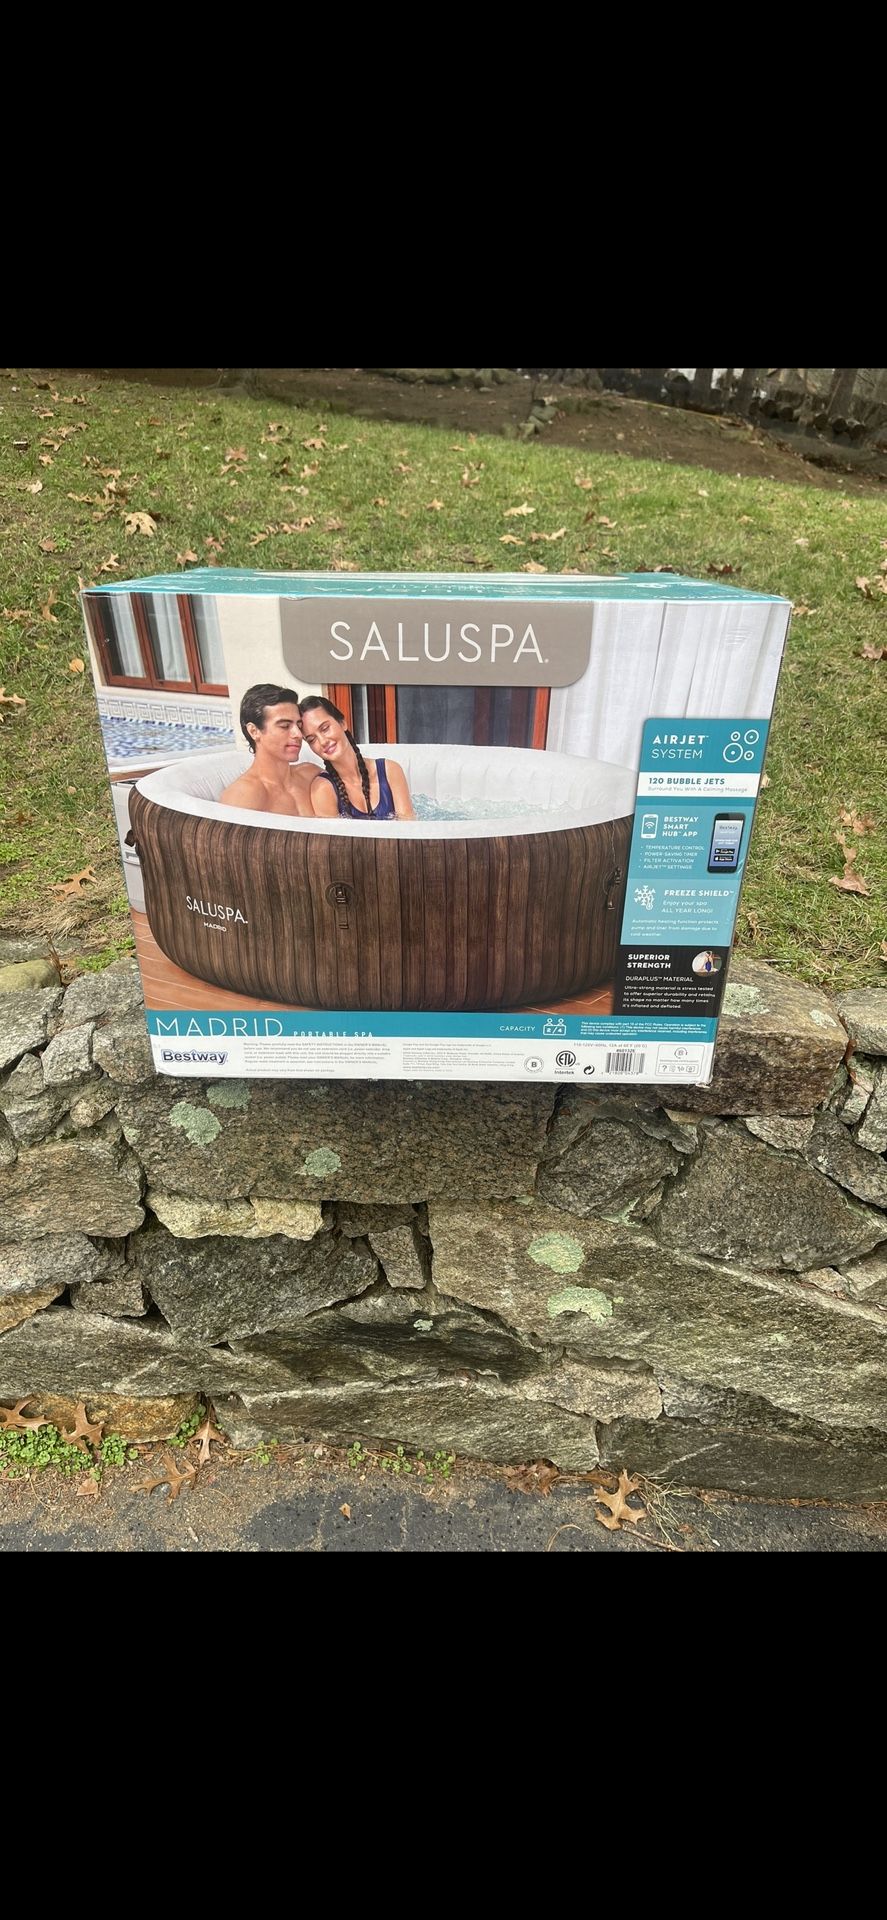 BRAND NEW Bestway SaluSpa Inflatable Hot Tub (2-4 Person)